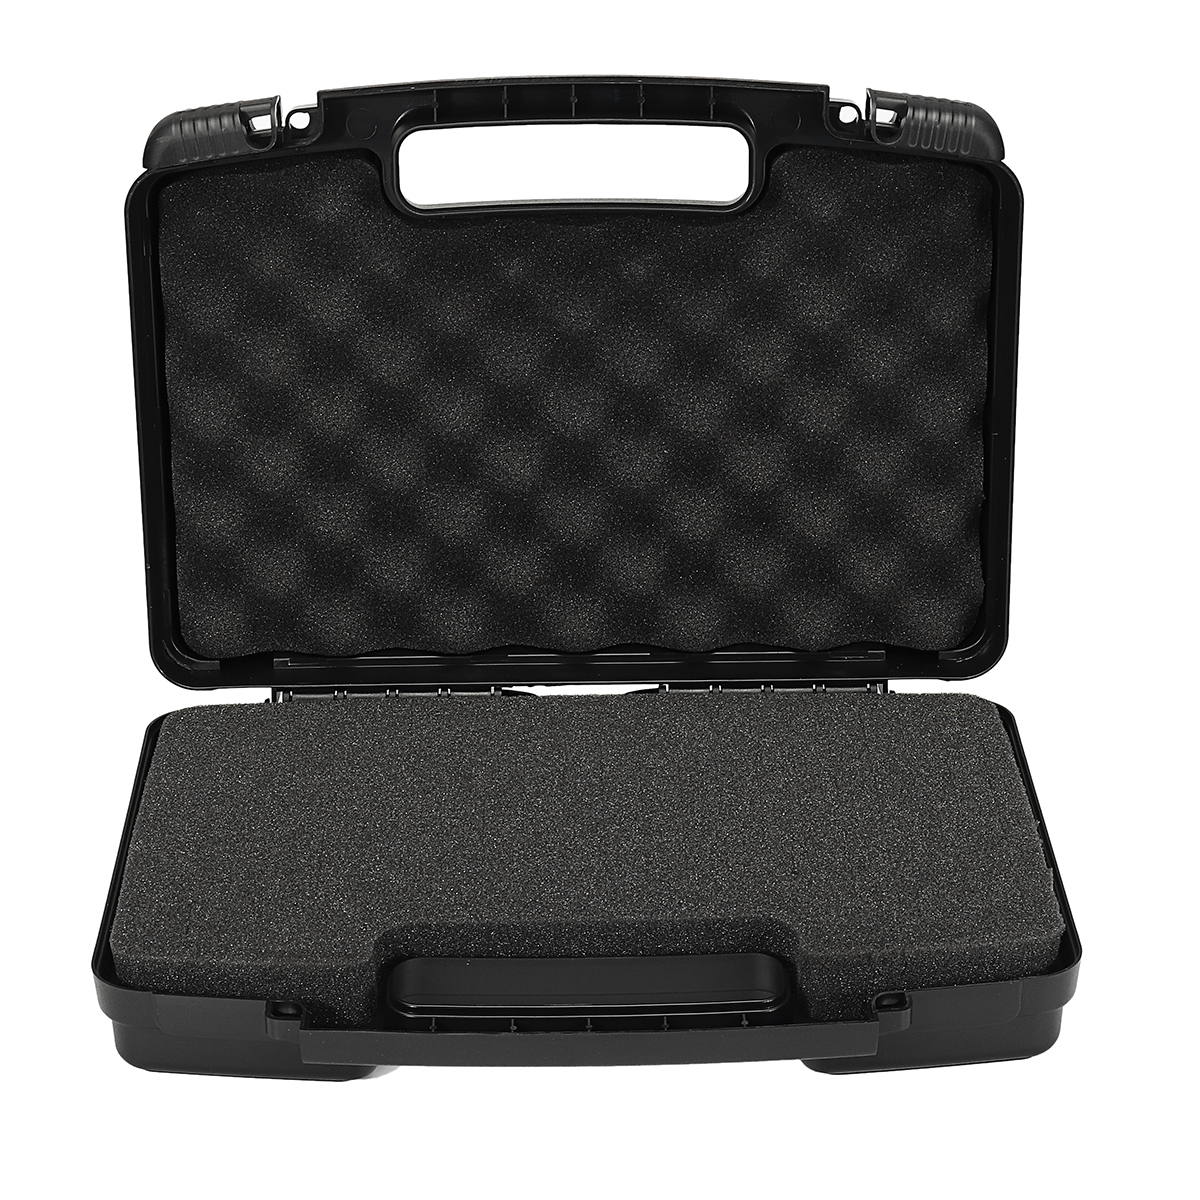 Waterproof-Hard-Carry-Tool-Case-Bag-Storage-Box-Camera-Photography-with-Foam-1791082-6